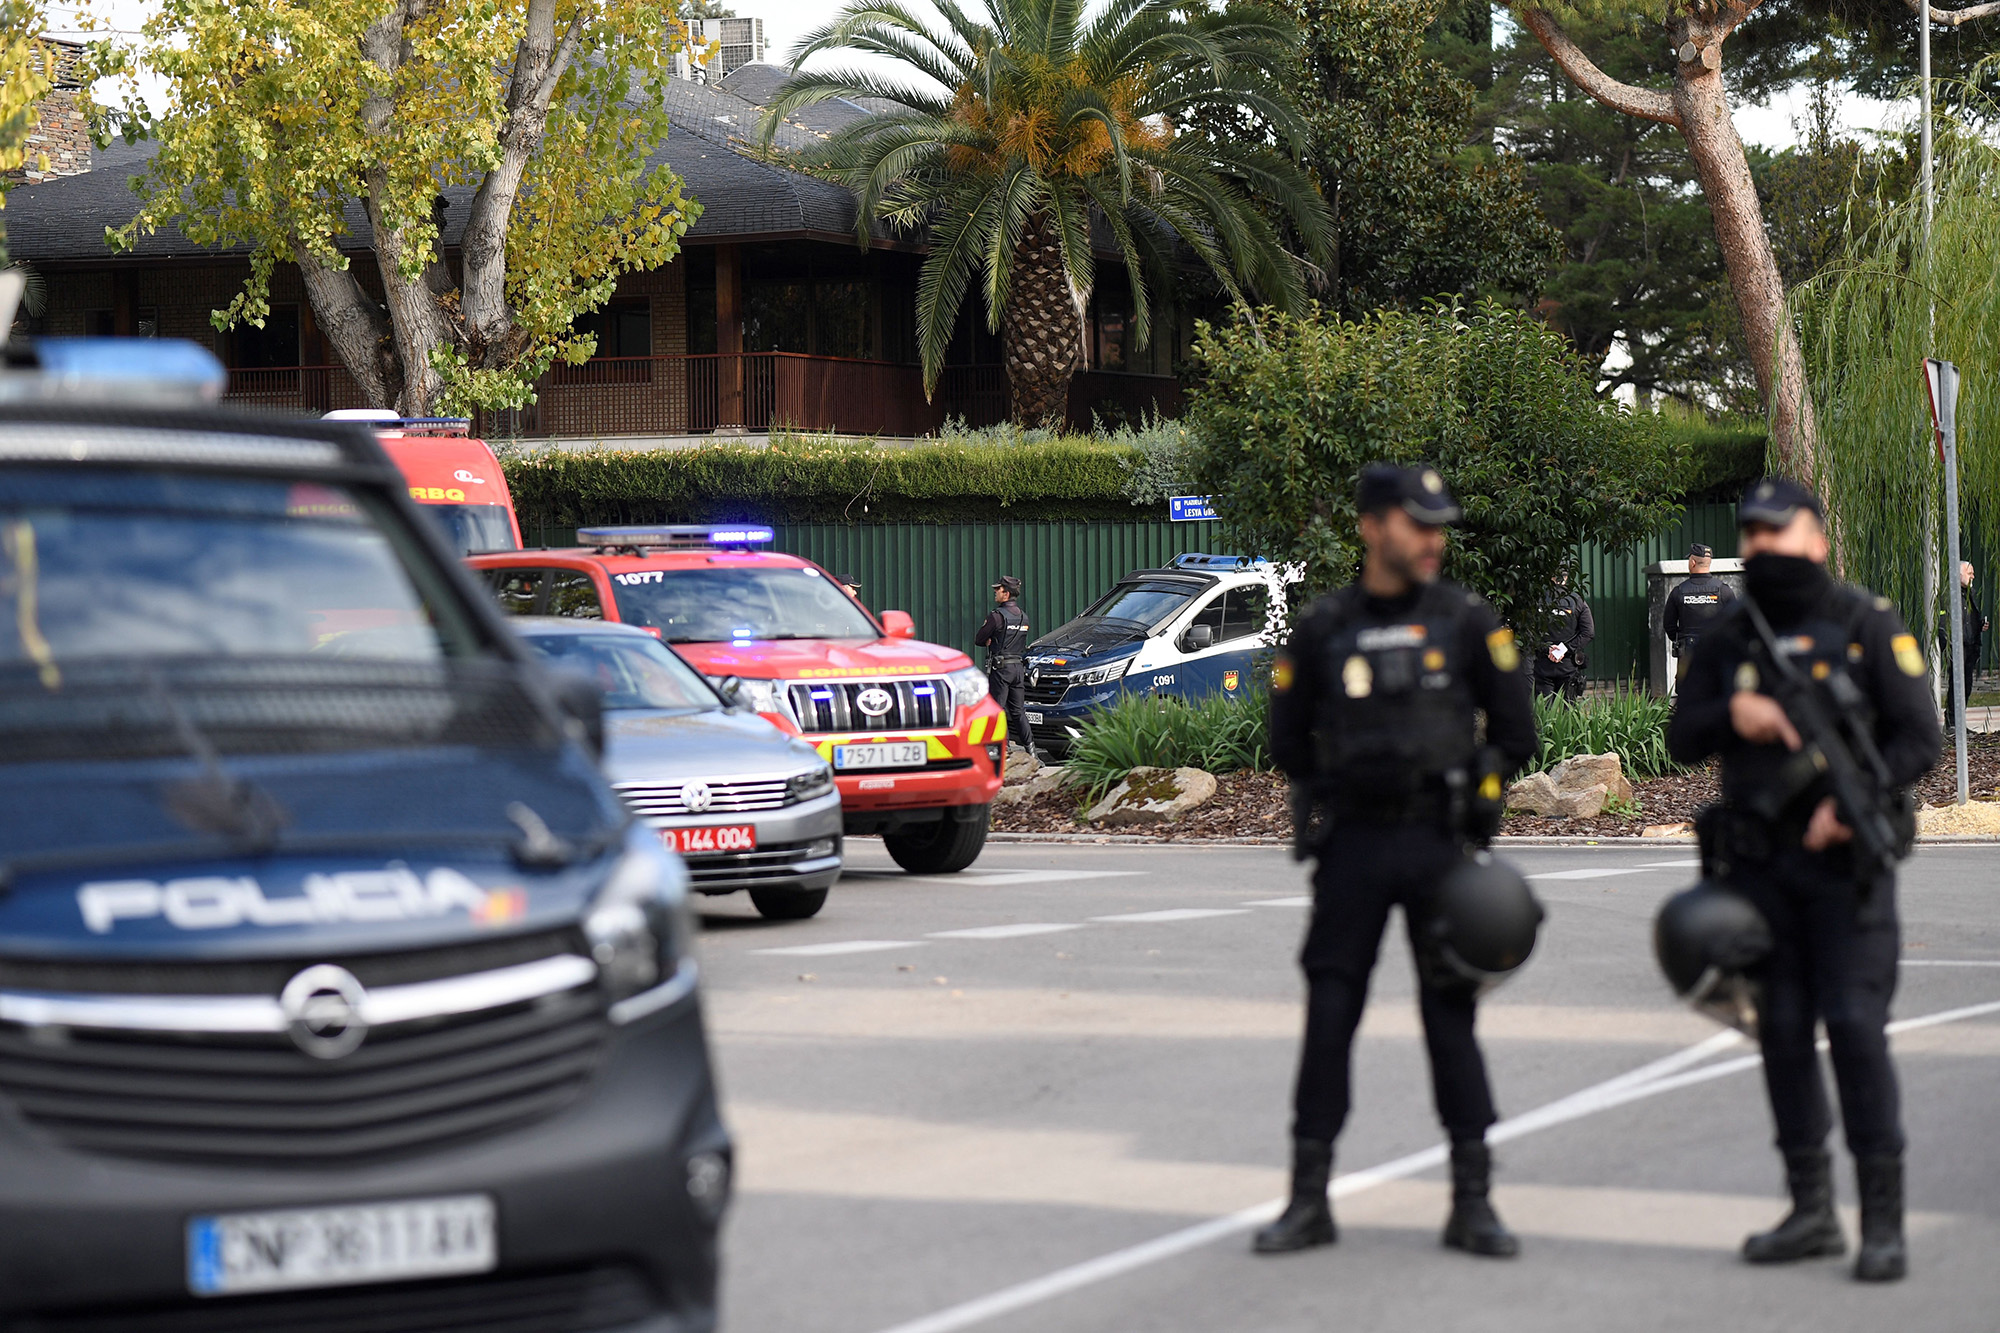 Spanish policemen secure the area after a letter bomb explosion at the Ukraine's embassy in Madrid, Spain, on November 30.